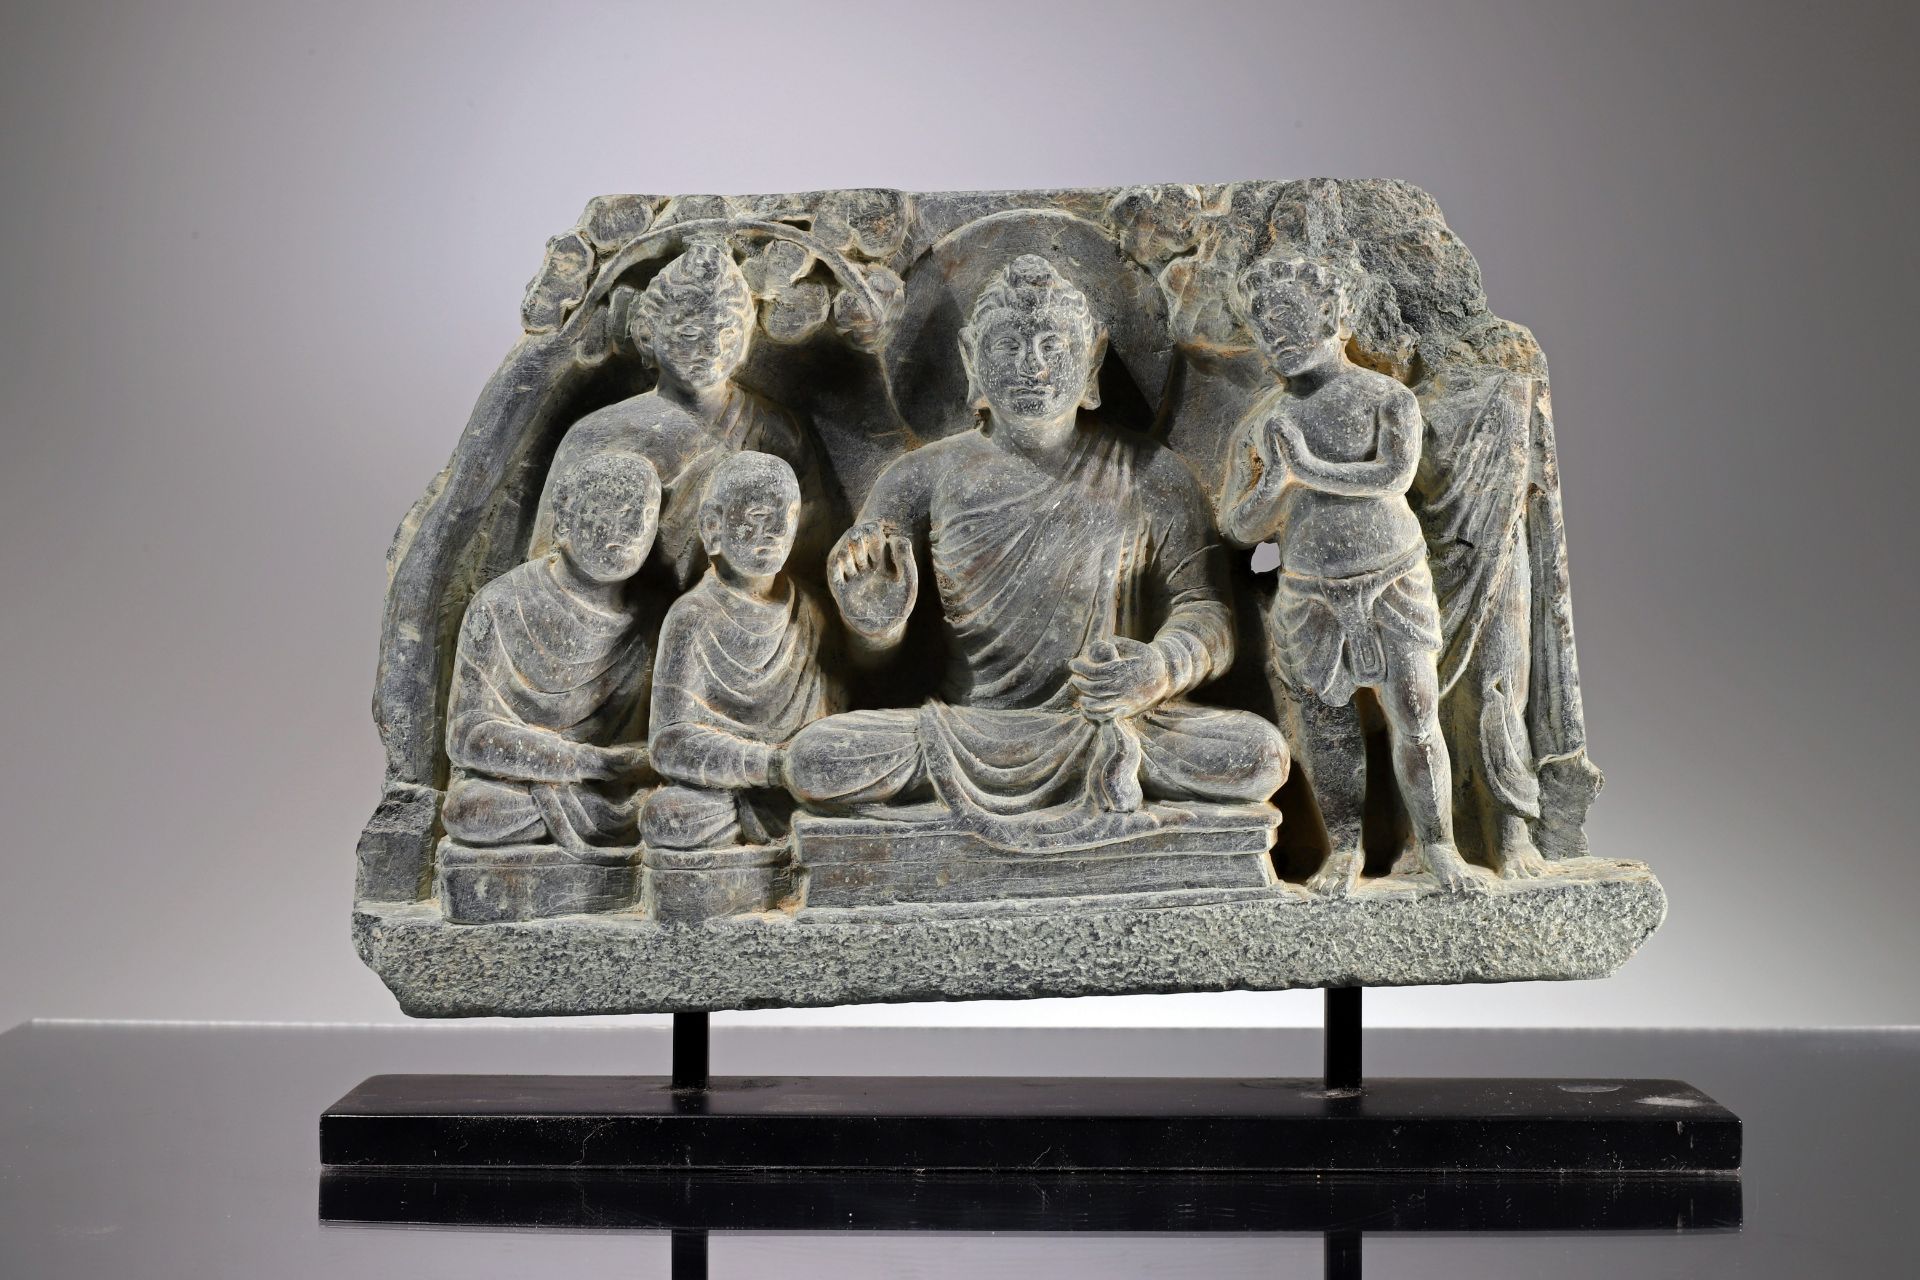 A RELIEF DEPICTING BUDDHA AND FOLLOWERS